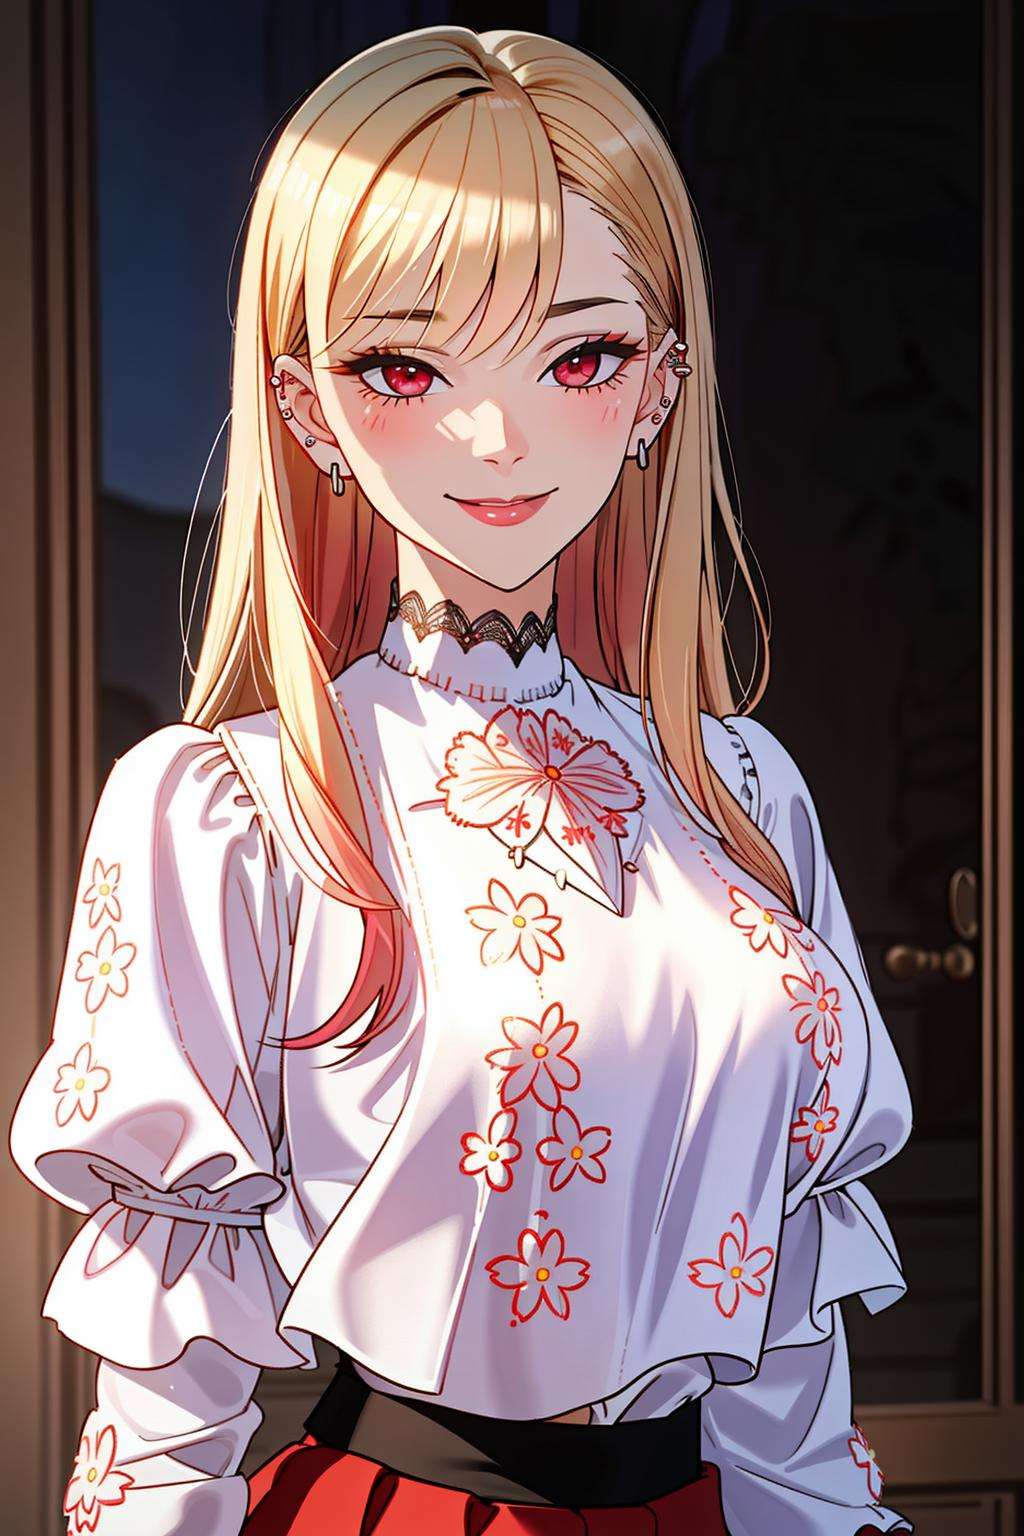 ((Masterpiece, best quality)),edgQuality,smirk,smug, <lora:MarinKitagawa:0.65>gradient blonde hair color, piercings, choker,red eyes,edgCT, a woman in a blouse, and a skirt,wearing edgCT,chic top,crop top,puffy sleeves,(floral embroidery)<lora:edgChicTops1:1>